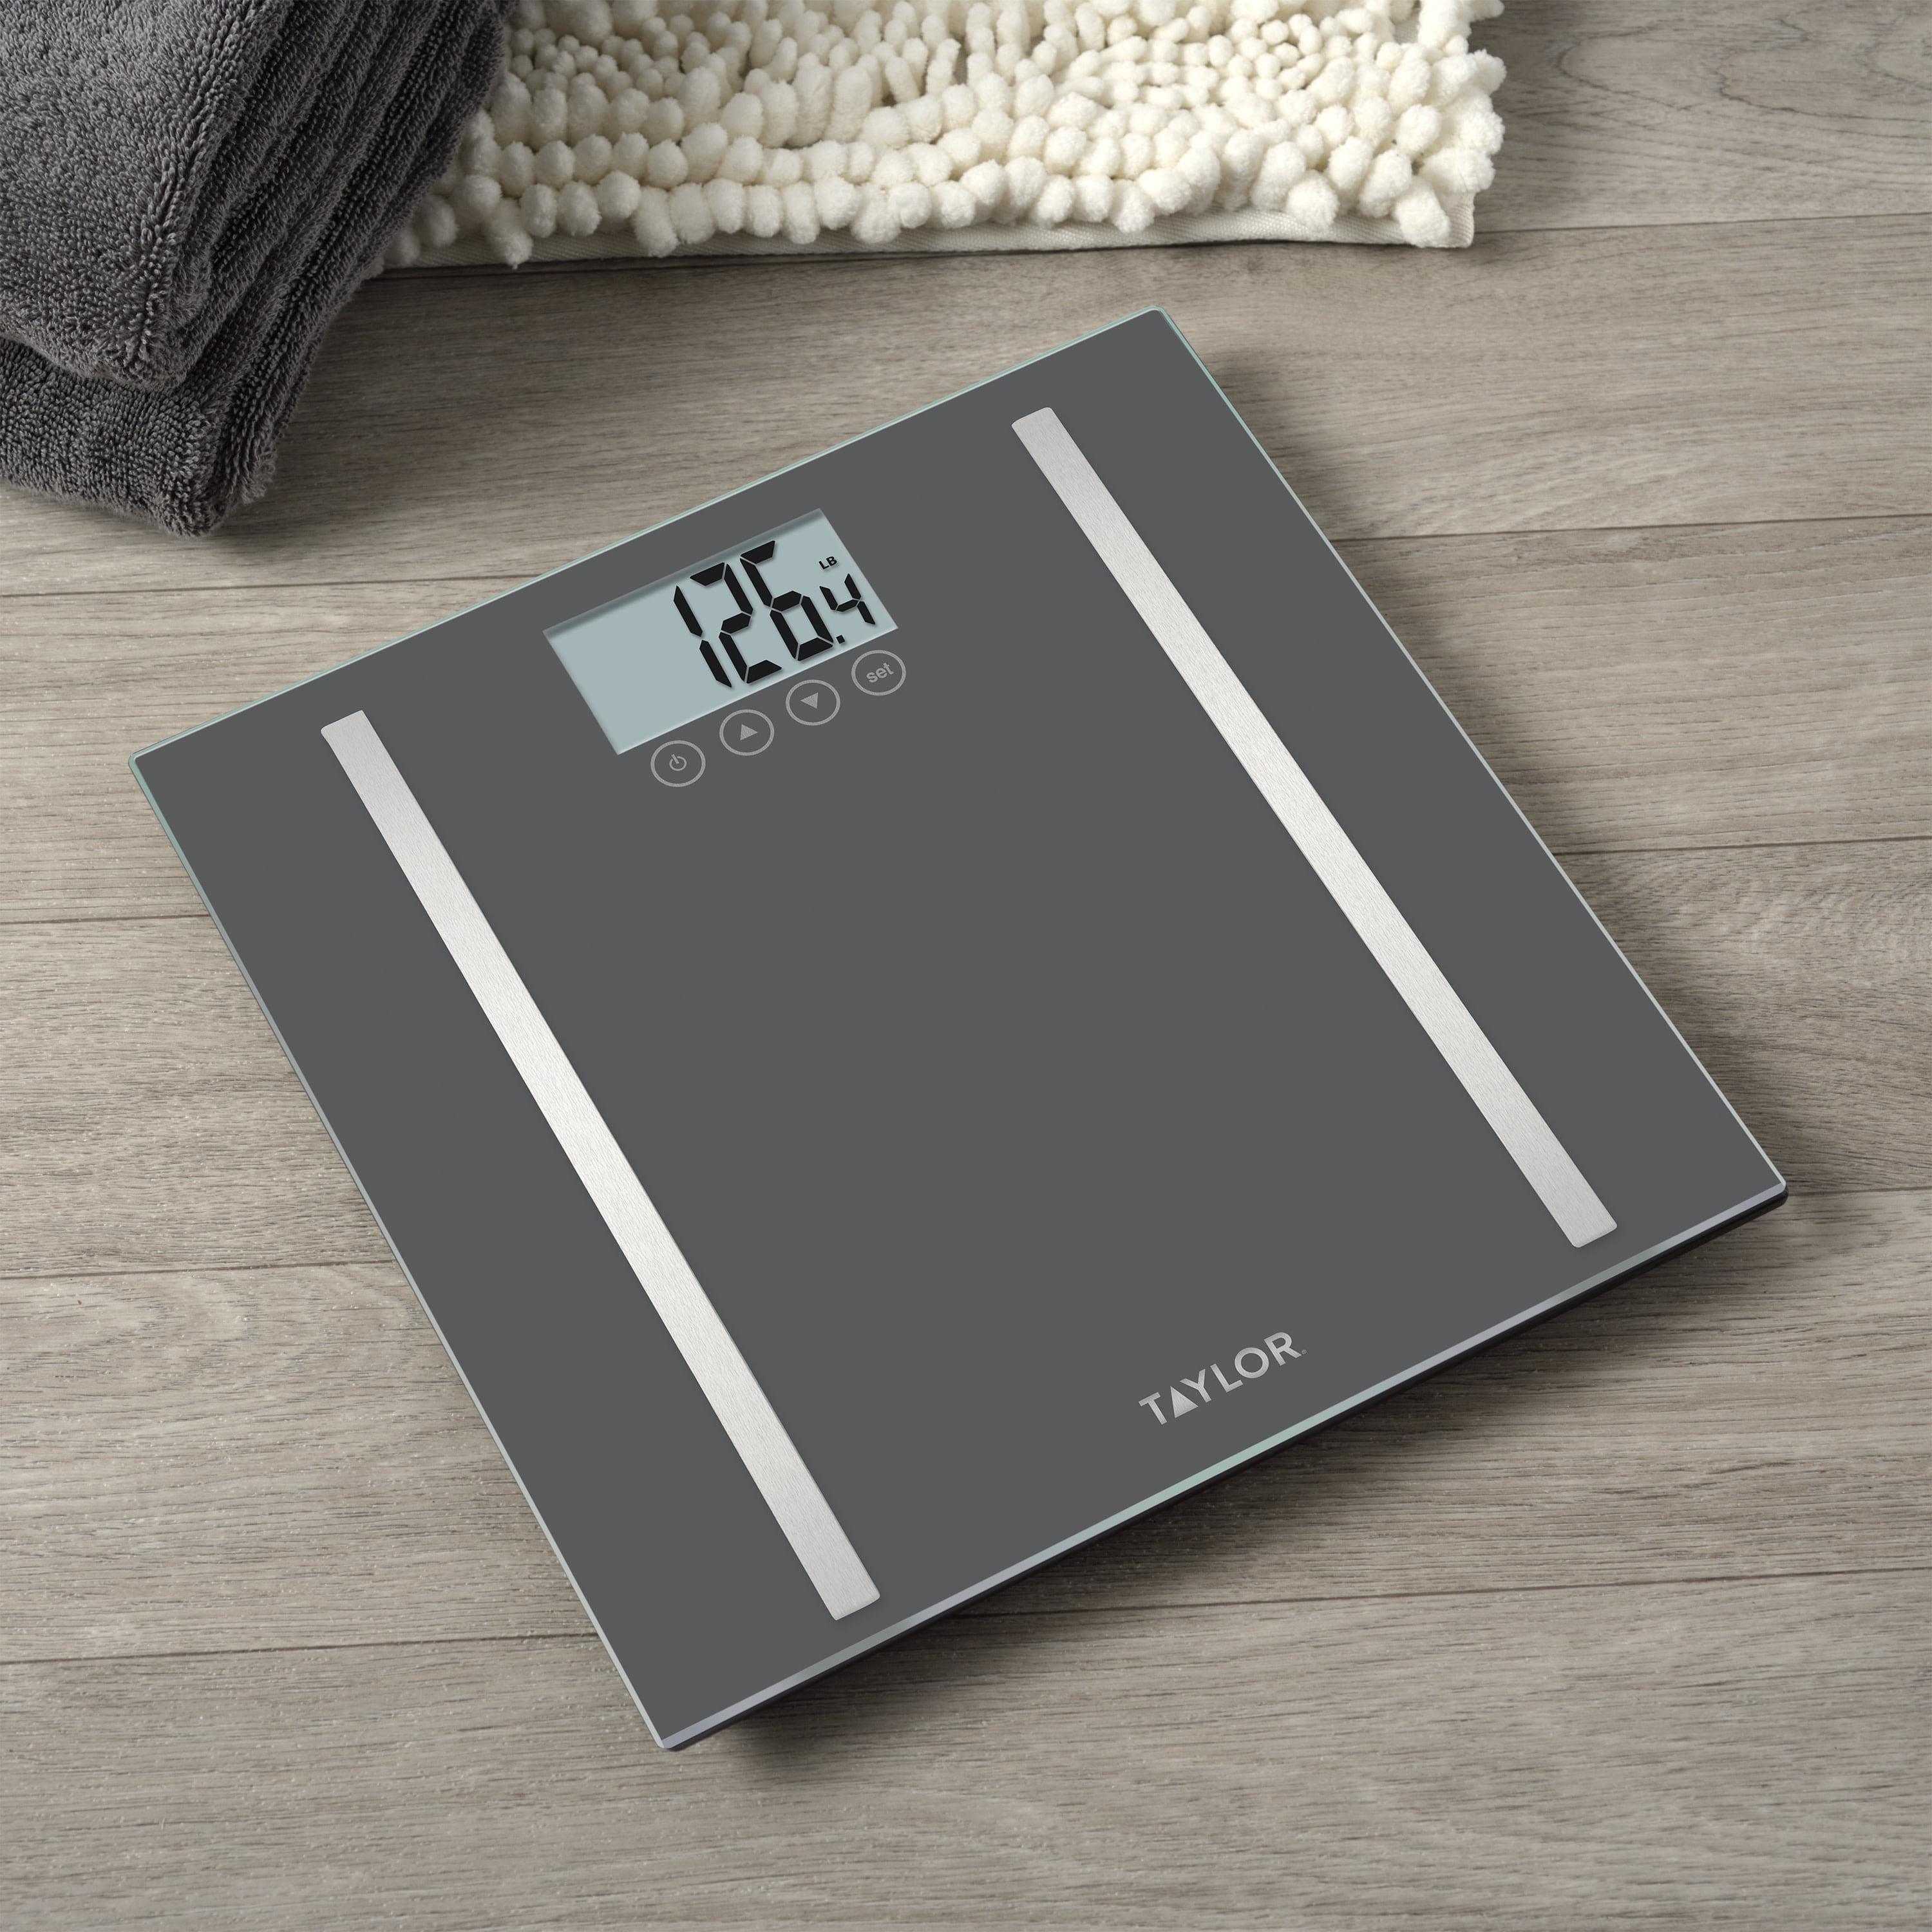 Taylor LCD Body Composition Scale, Gray Glass, 400lb Capacity 